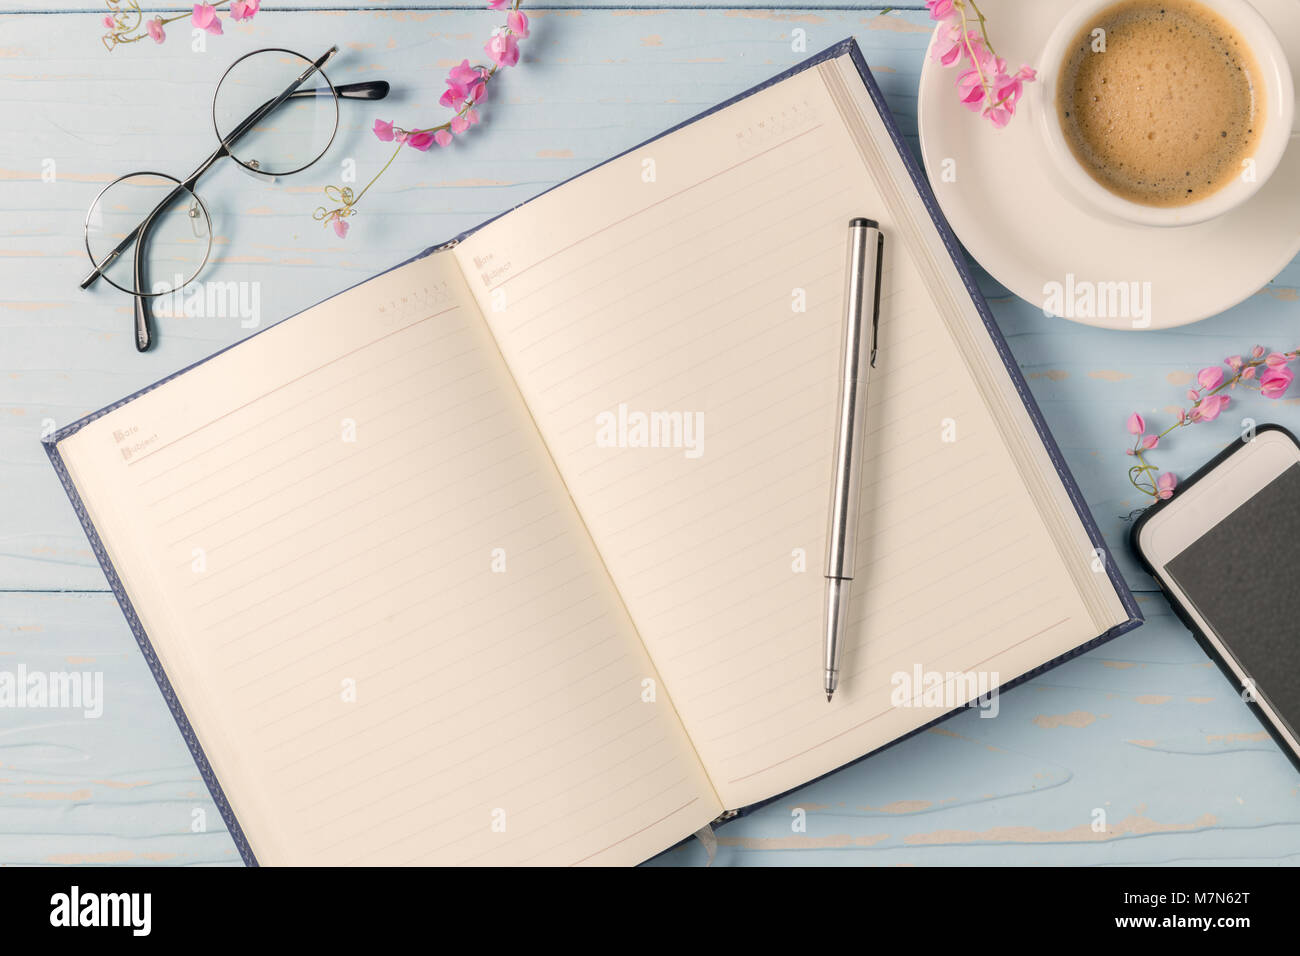 pen on blank diary book with hot black coffee and glasses on old blue wood background, vintage tone Stock Photo